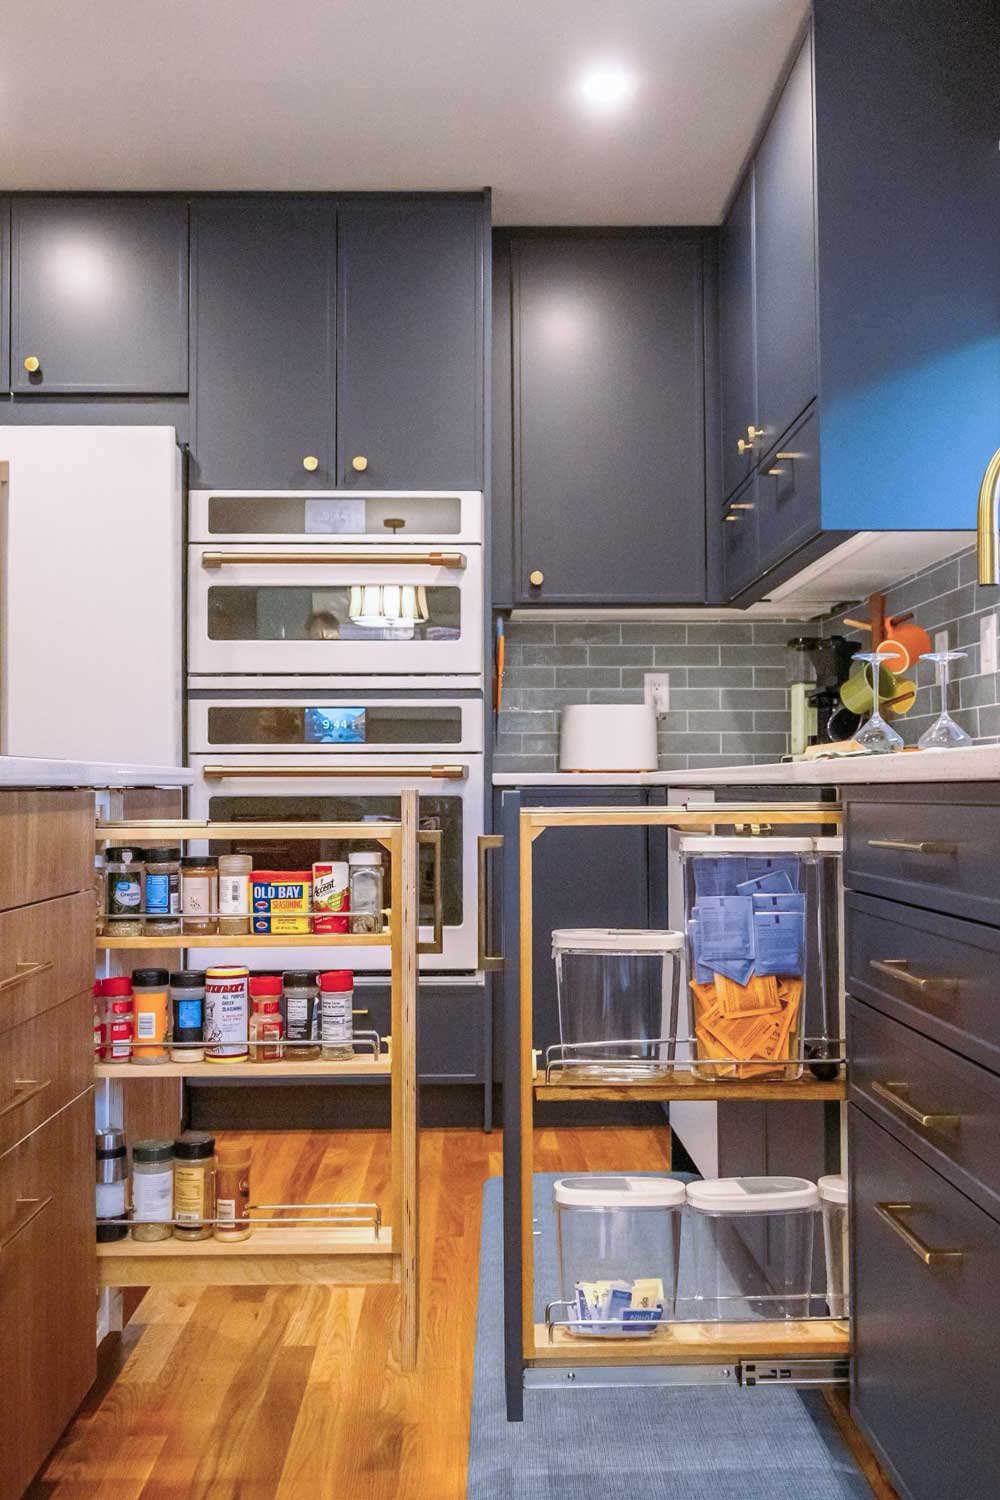 Rev-A-Shelf storage solutions allow for extra cabinet organization